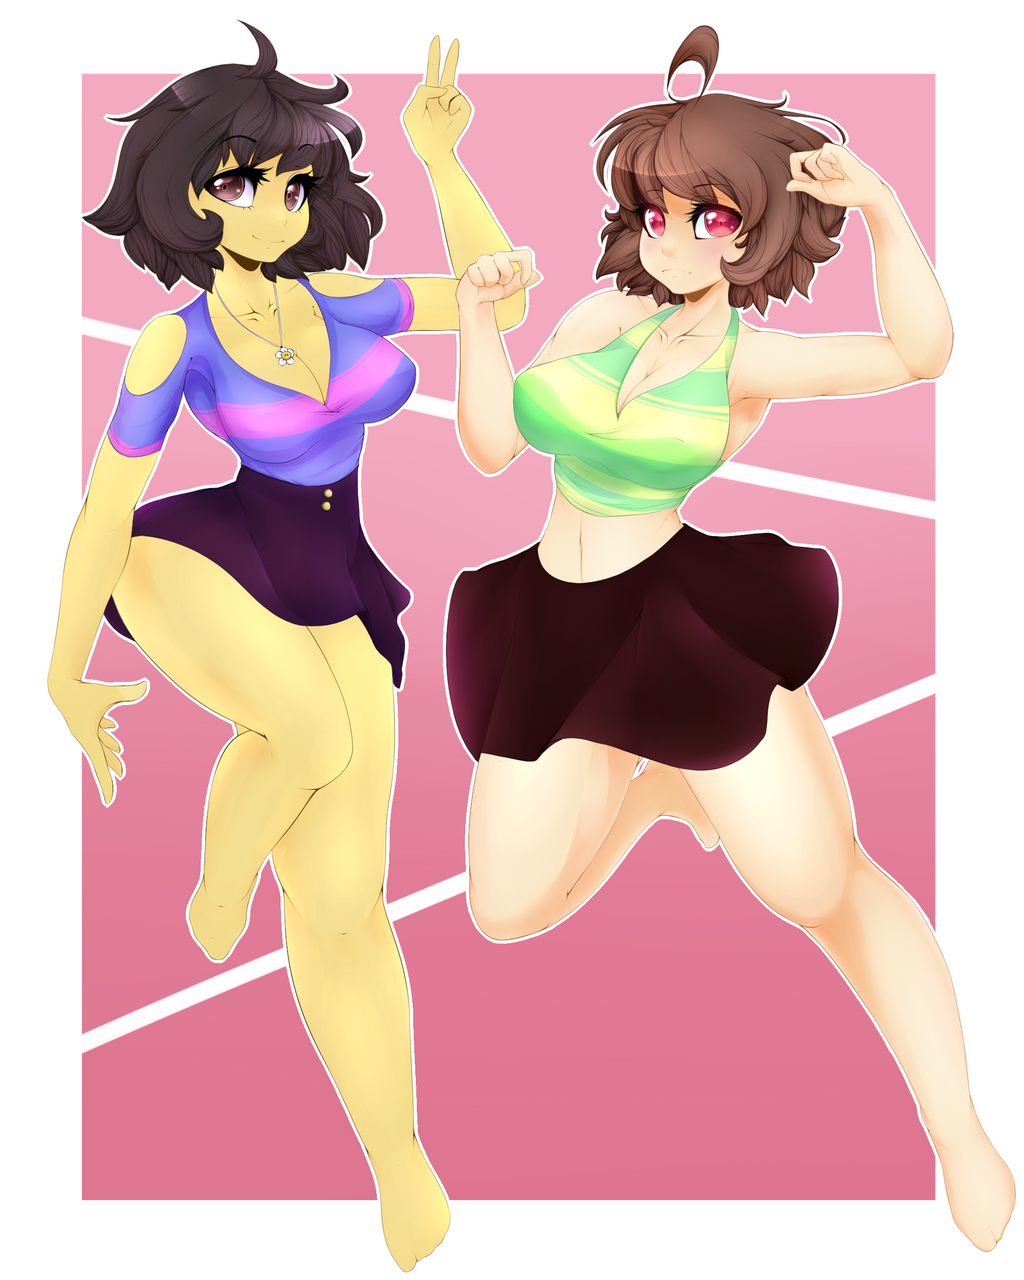 Chara X Frisk By Ayloulou On Deviantart 